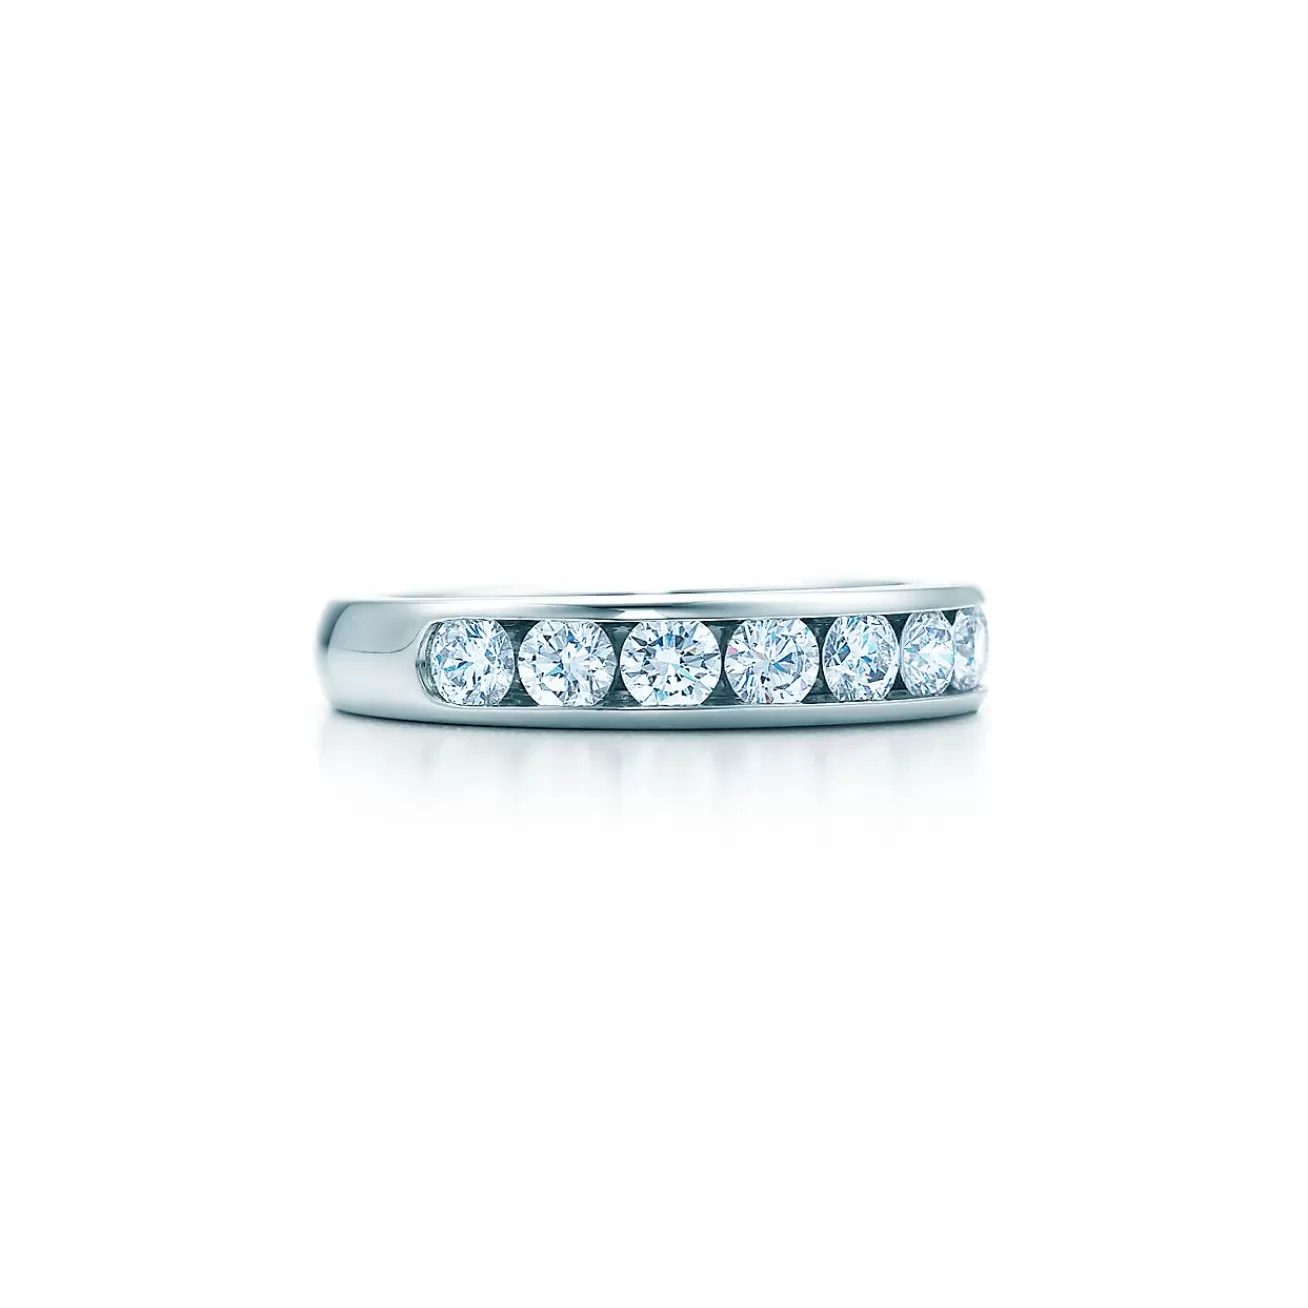 Tiffany & Co. Tiffany® Setting Wedding Band in Platinum with a Half-circle of Diamonds, 3.9 mm | ^Women Rings | Platinum Jewelry